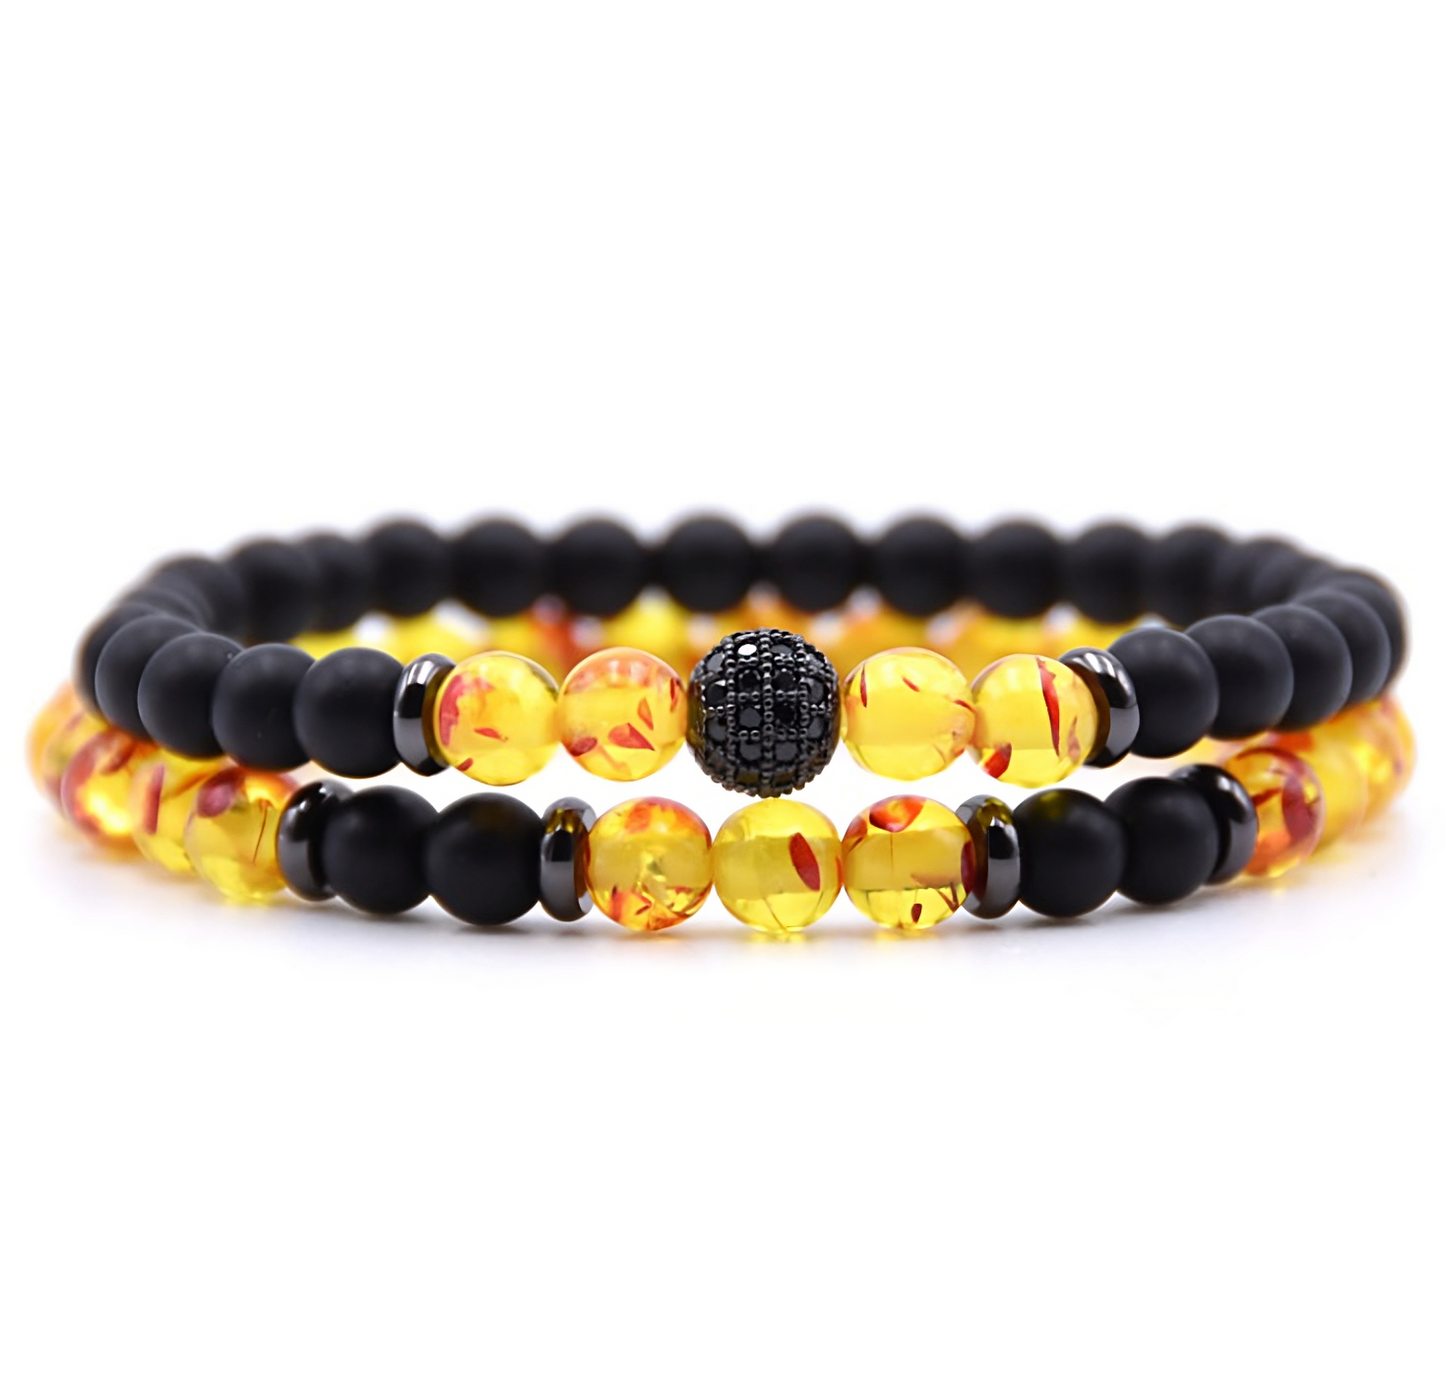 Luxury Micro-inlaid Zircon Bracelet with Natural Stone Beads | Handcrafted Jewelry - VHD